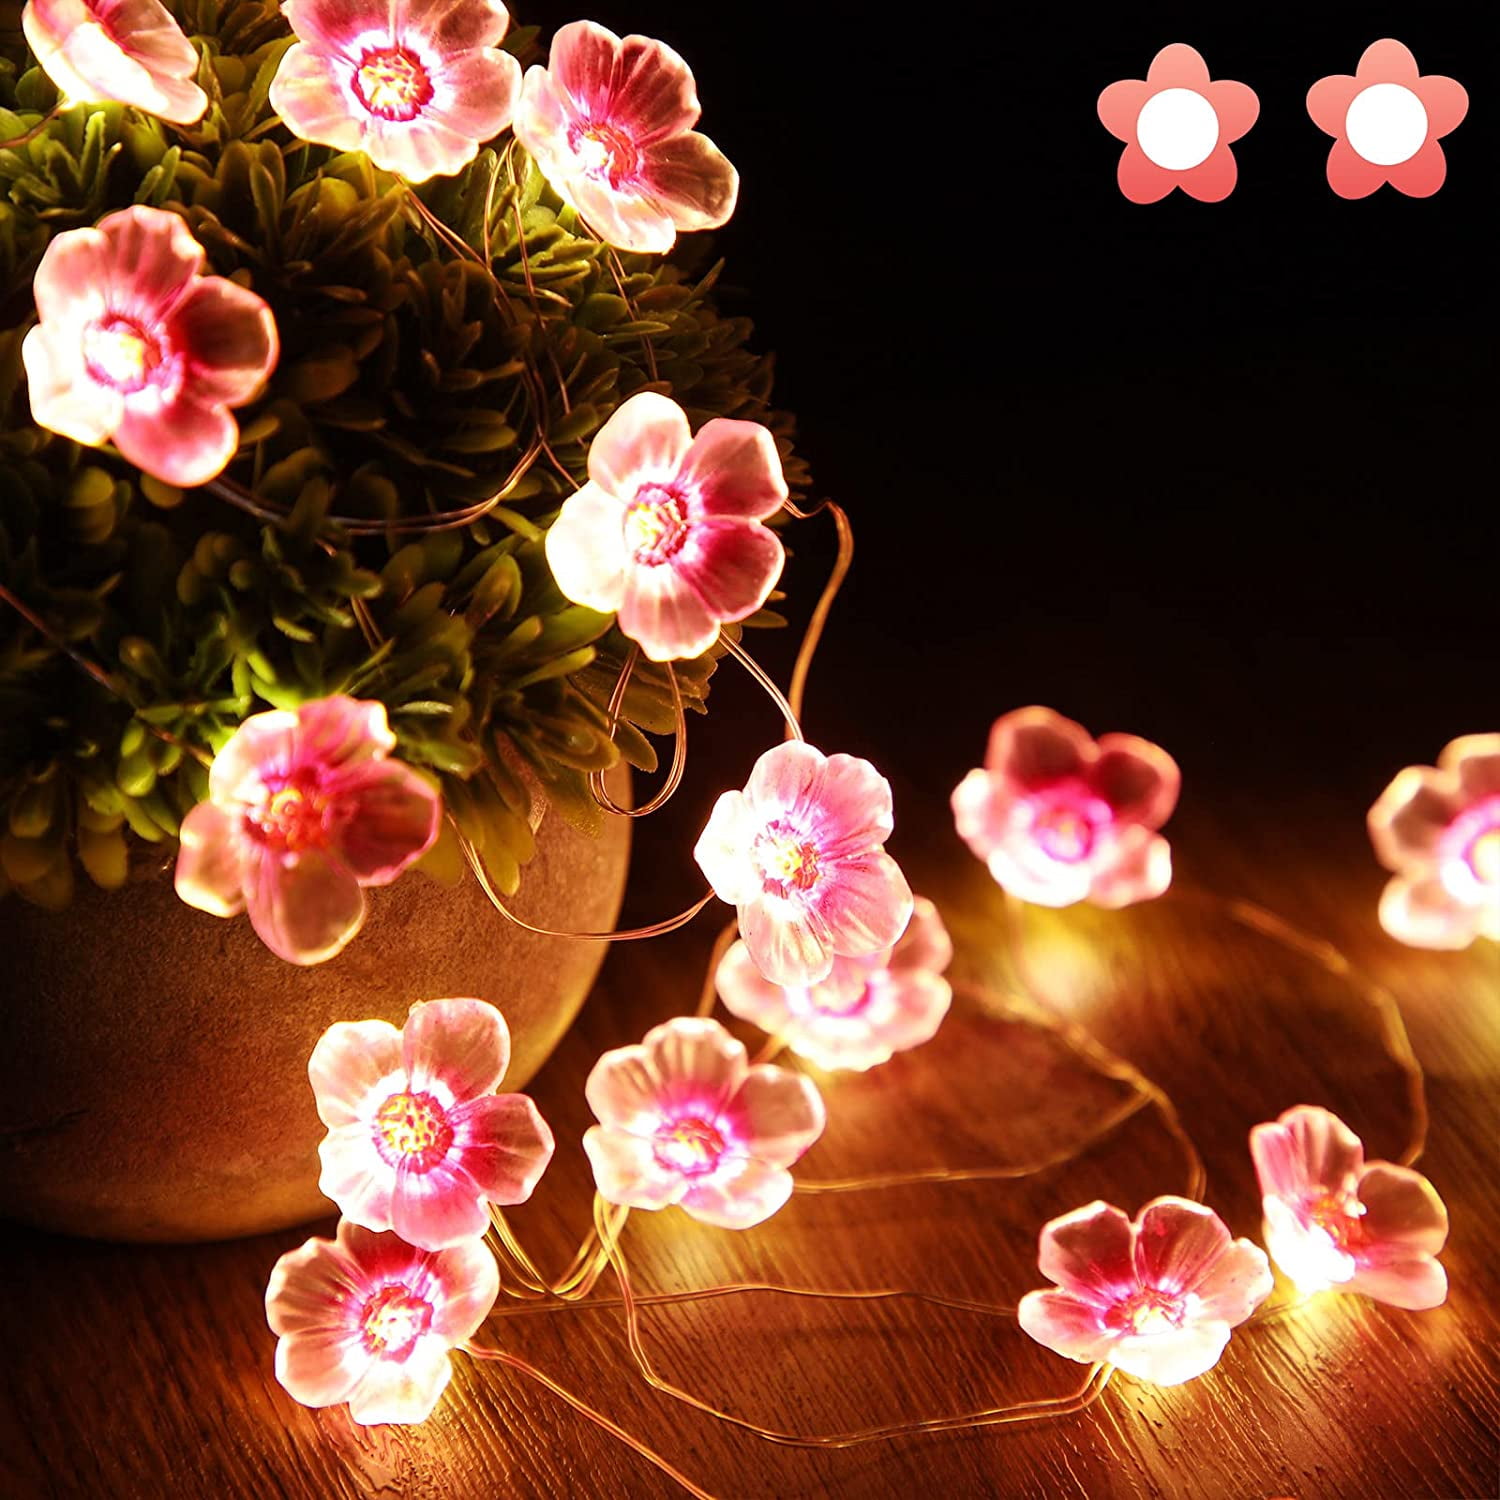 Cherry Blossom Flower Lights 10FT 30 Led Fairy Lights Battery Operated Decorative String Lights for Wedding Party Valentine's Day Bedroom Indoor Decor -